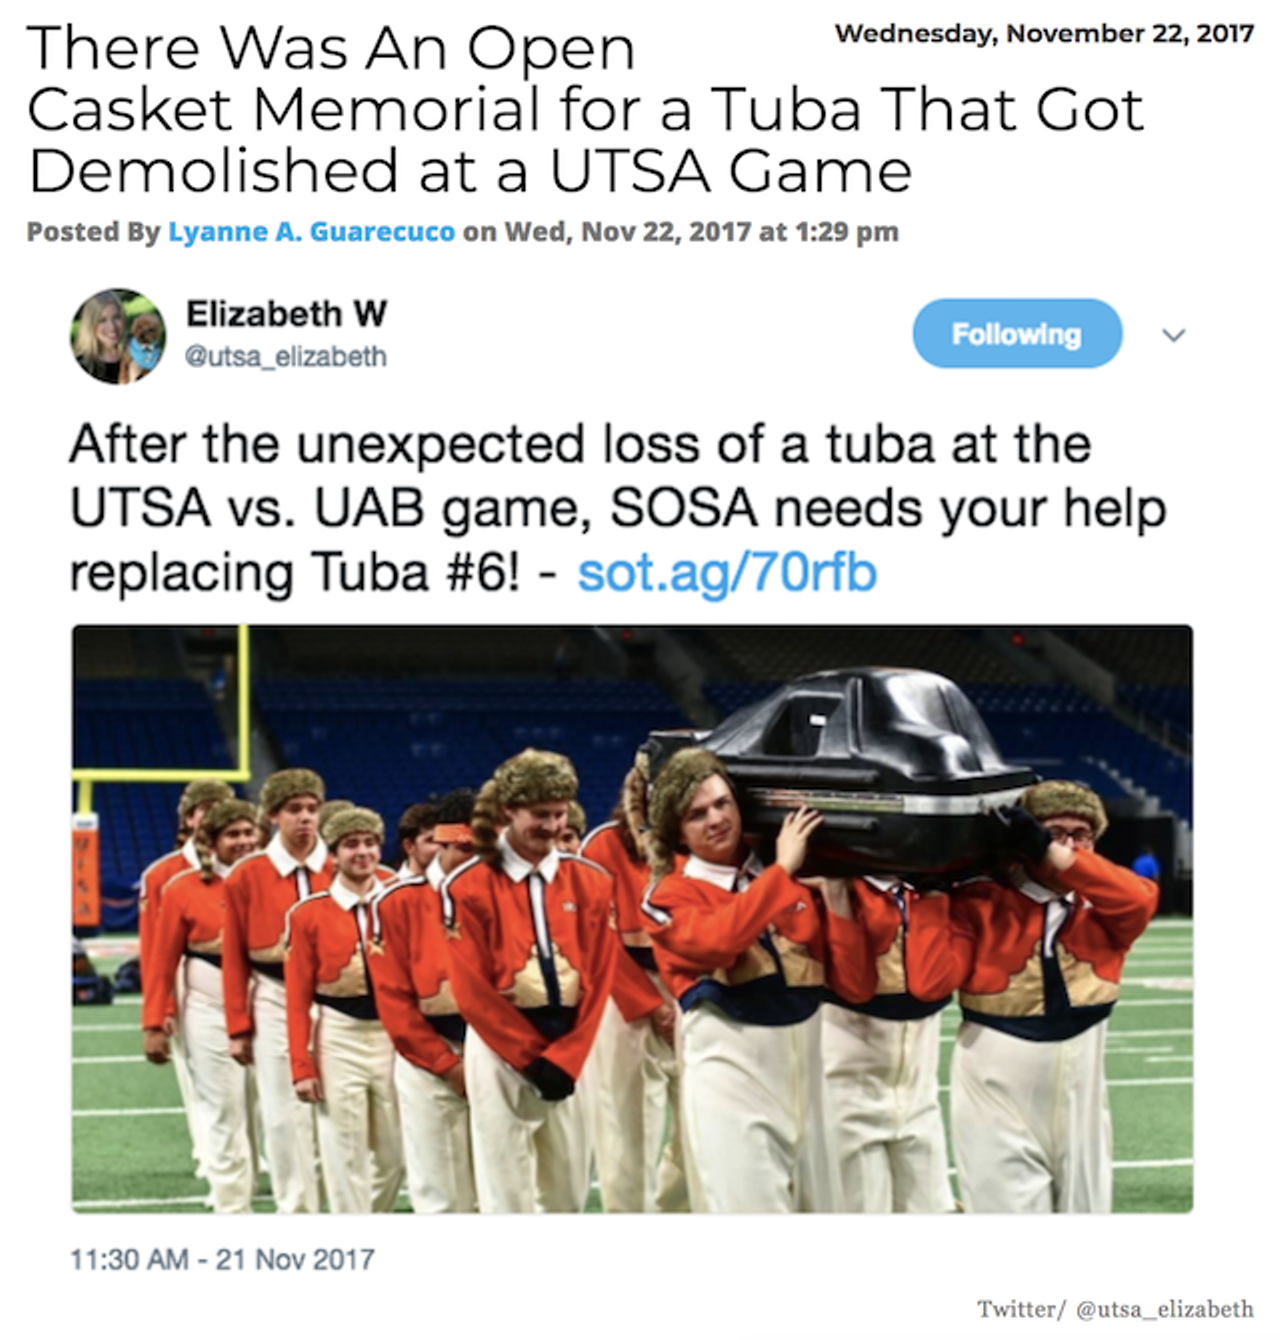 Tuba #6... gone, but not forgotten. After getting completely wrecked in a UTSA football game, several band members paid tribute to the fallen instrument with an open casket ceremony, which is... sweet? Morbid? Both? Read more.